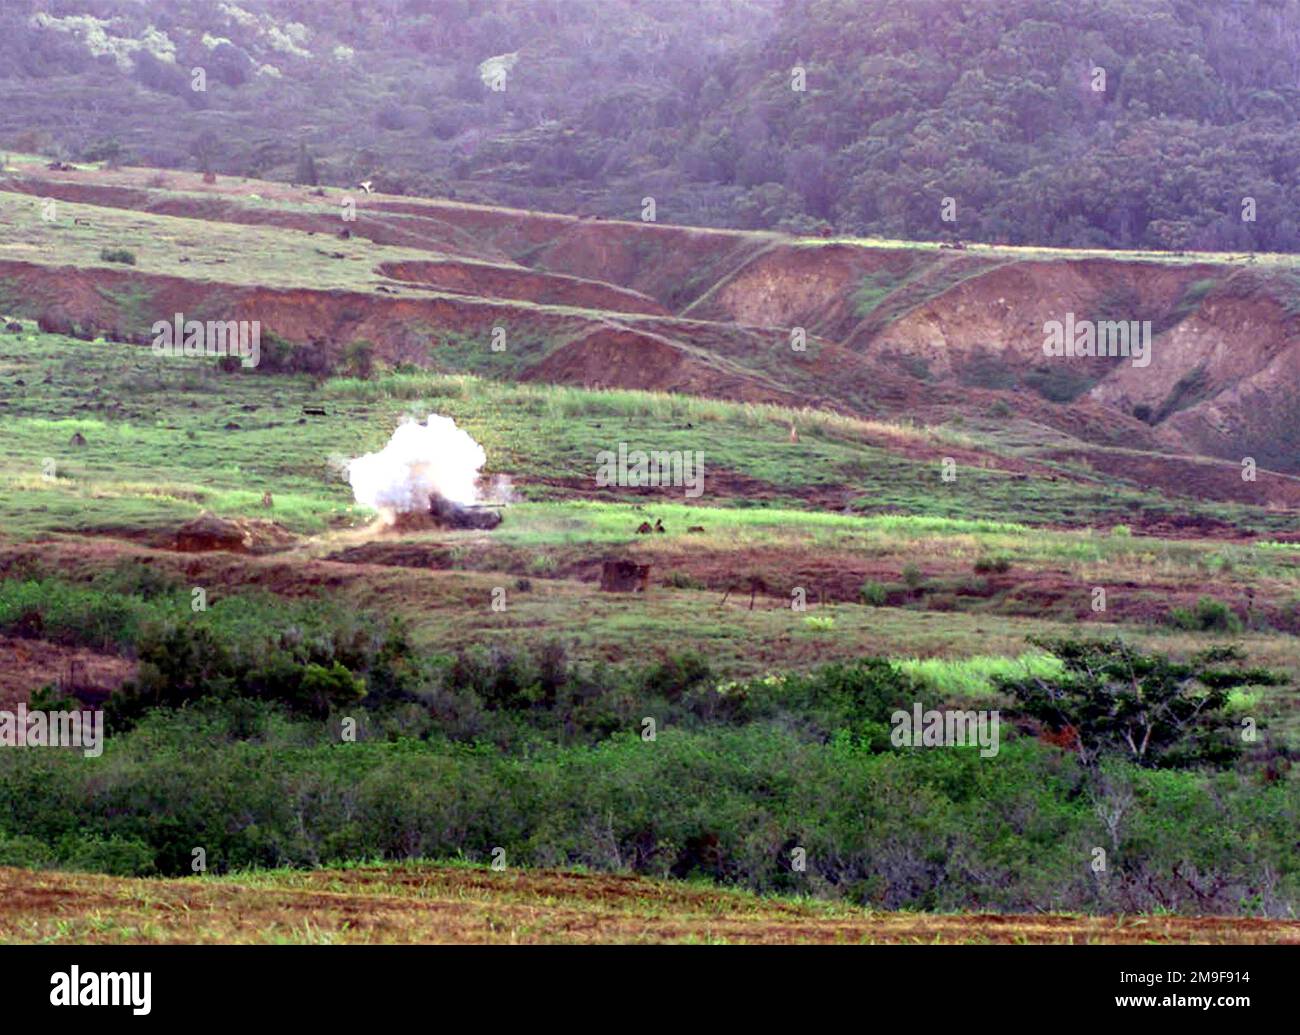 1ST Battalion, 3rd Marines Anti Armor Squad (Not shown) takes out a target with the Dragon Missile at Army Schofield Barracks Training Field, Kaneohe Bay, Hawaii, on August 24th, 2000. Base: Schofield Barracks, Kaneohe Bay State: Hawaii (HI) Country: United States Of America (USA) Stock Photo